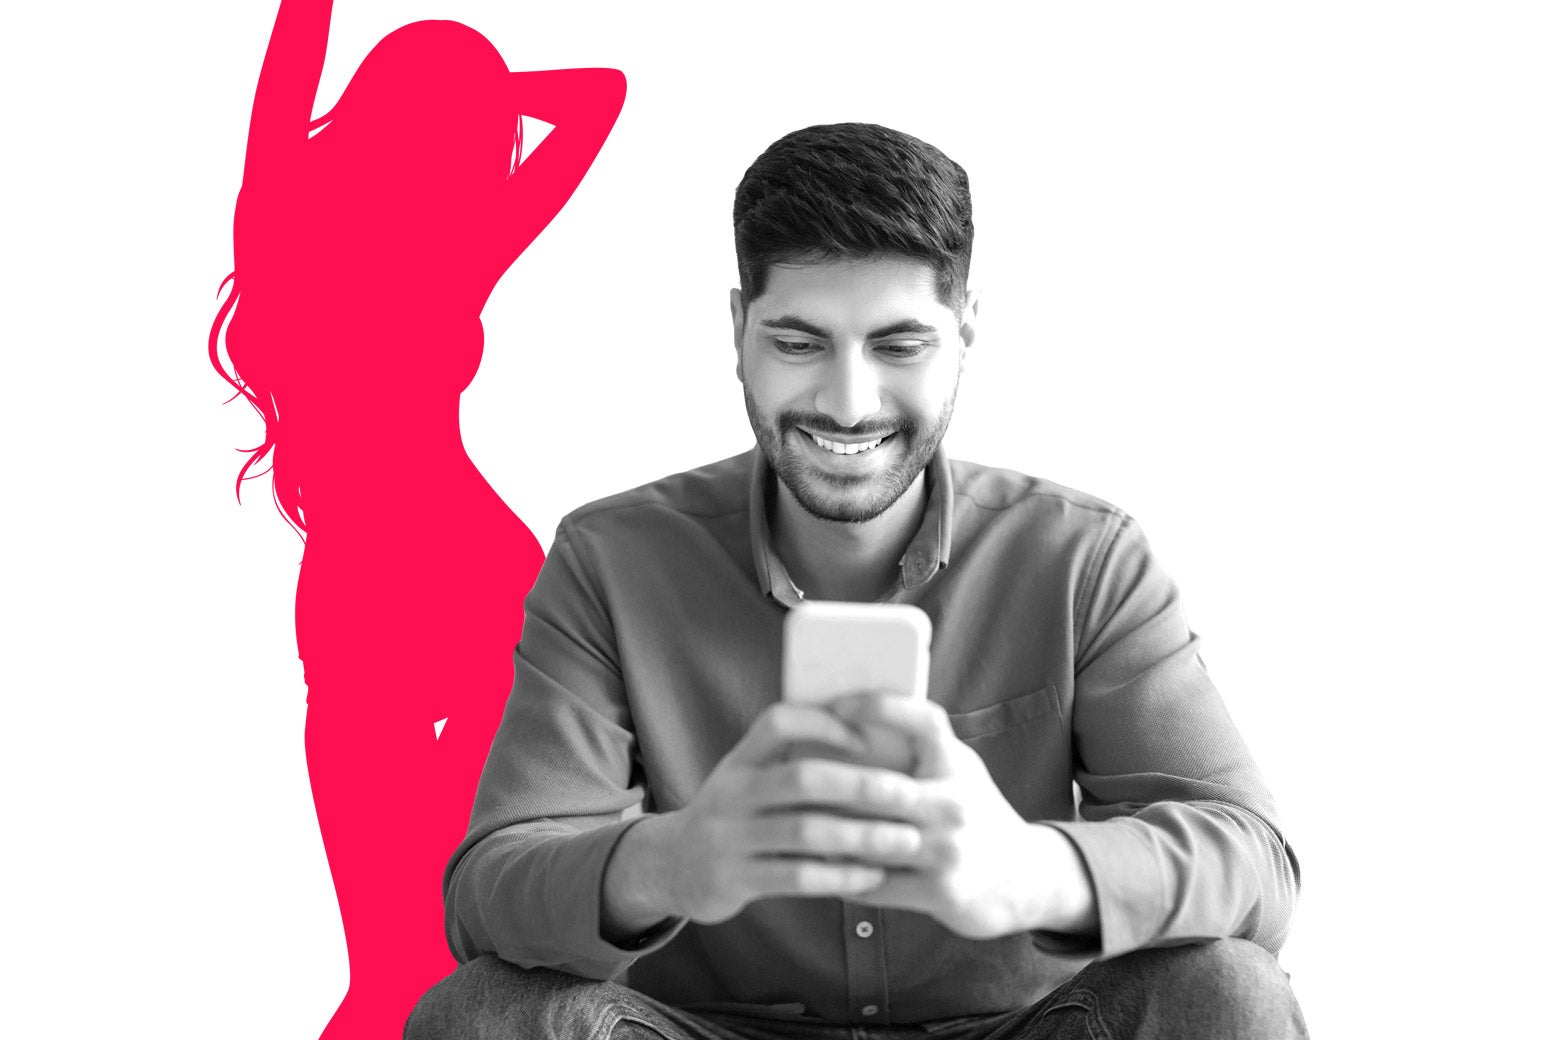 Guy smiling while he looks at his phone, with the silhouette of a woman dancing behind him.